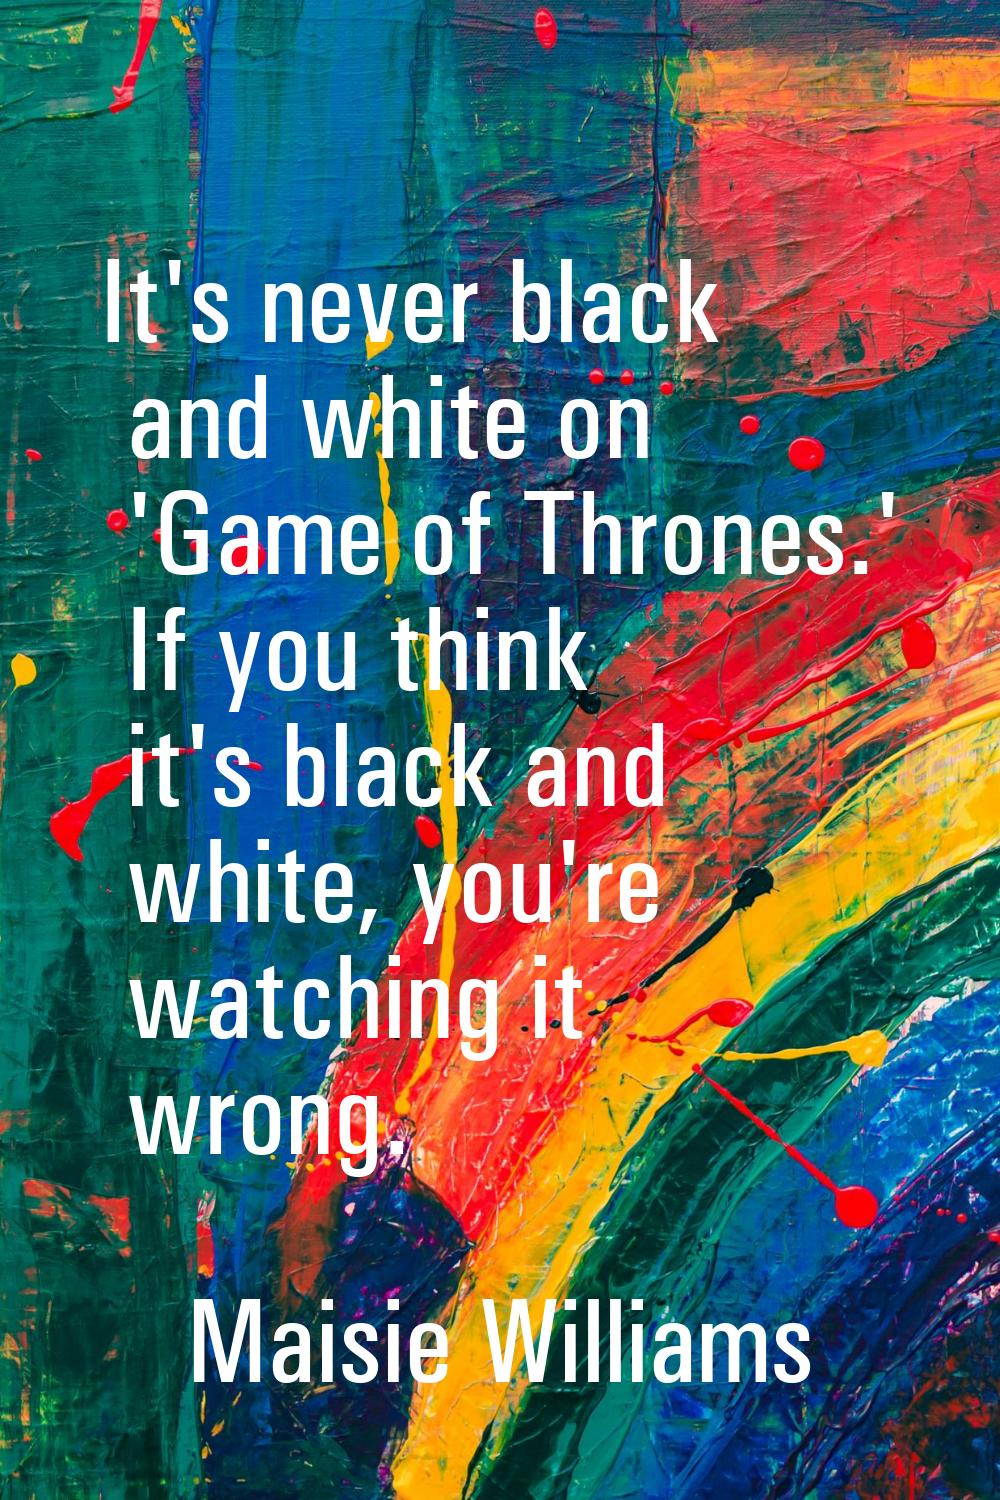 It's never black and white on 'Game of Thrones.' If you think it's black and white, you're watching